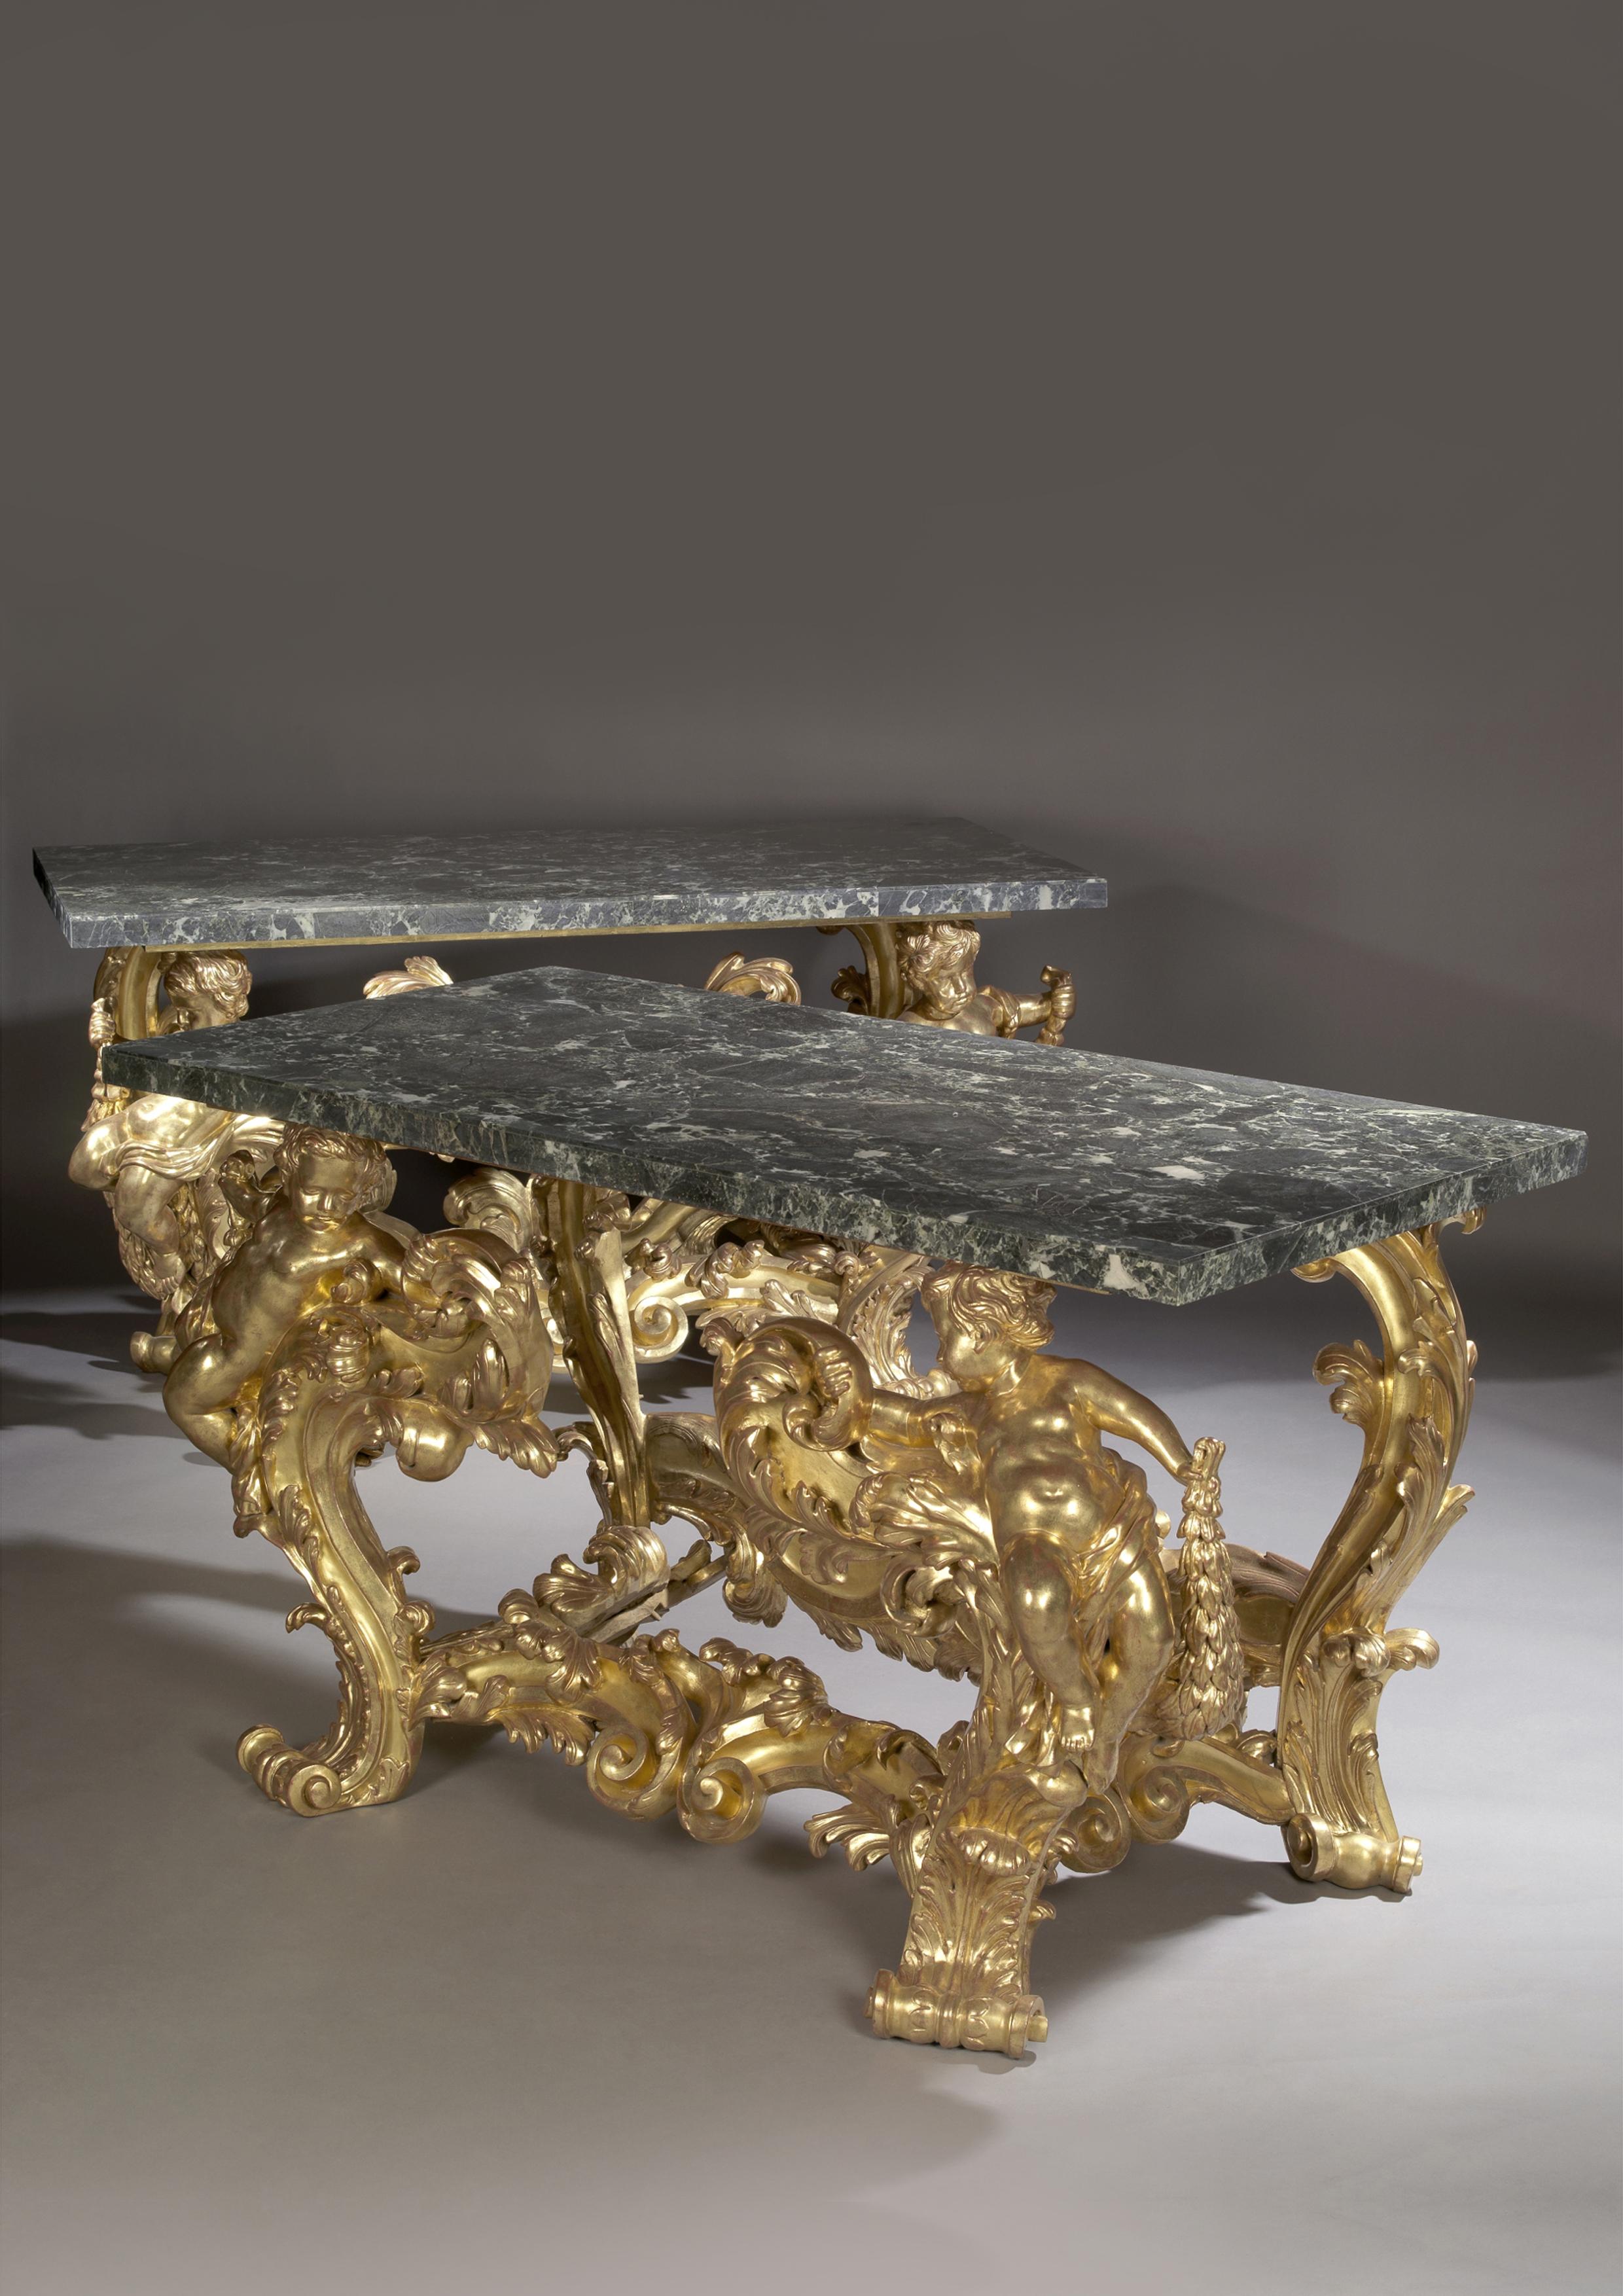 A magnificent and important pair of Palatial giltwood console tables with Verde Antico marble tops.

Italian or French, circa 1870. 

This exceptional pair of giltwood console tables each have rectangular verde antico marble tops supported by